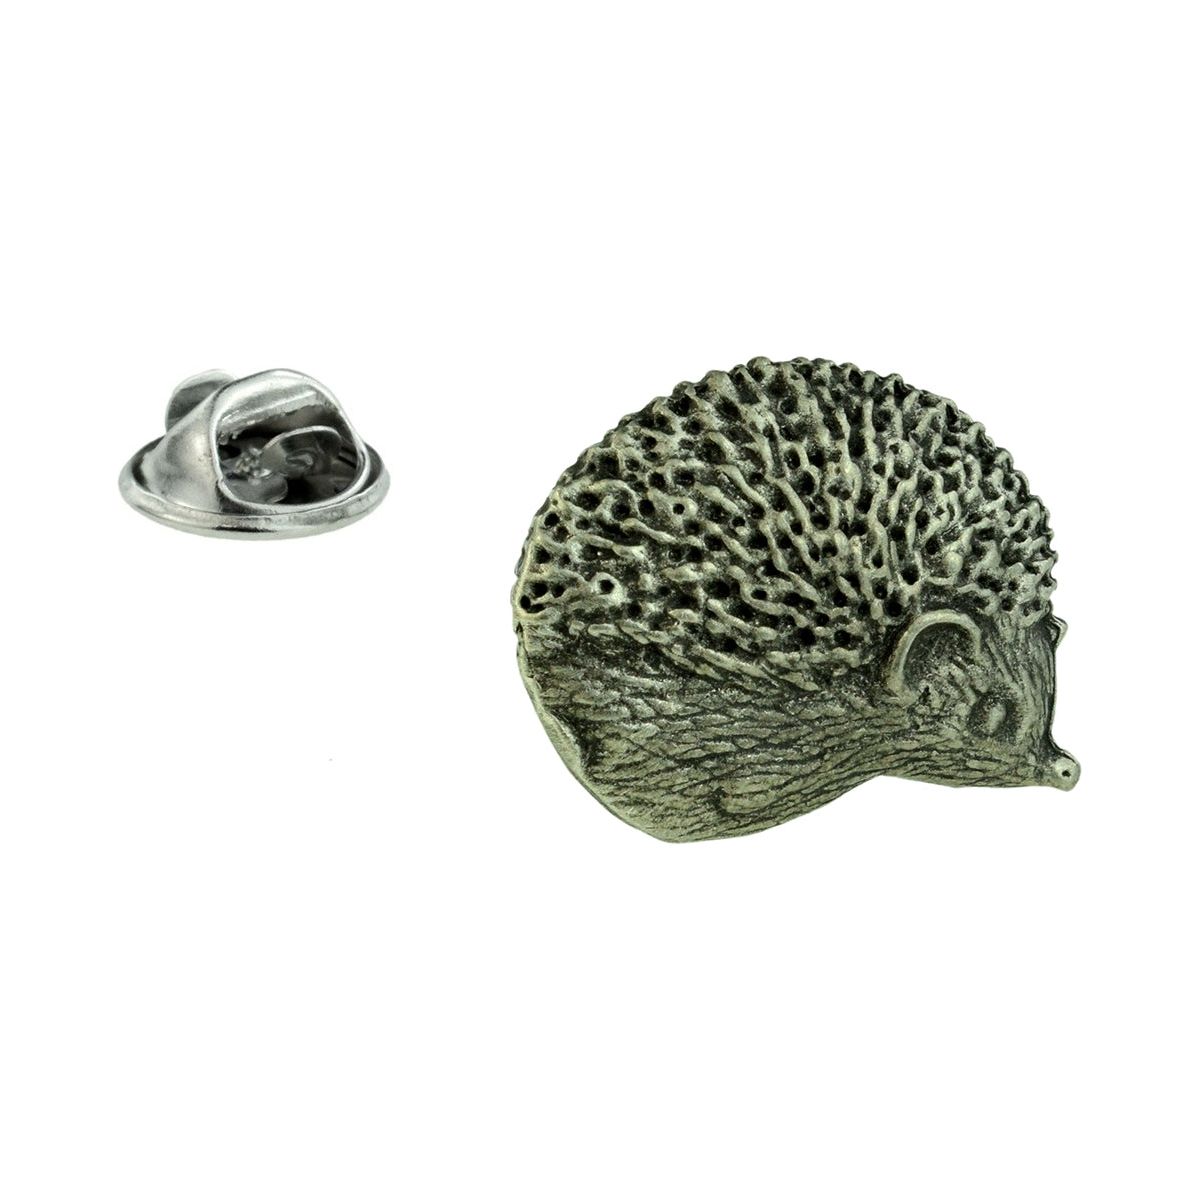 Hedgehog Lapel Pin Badge In British Pewter - Ashton and Finch